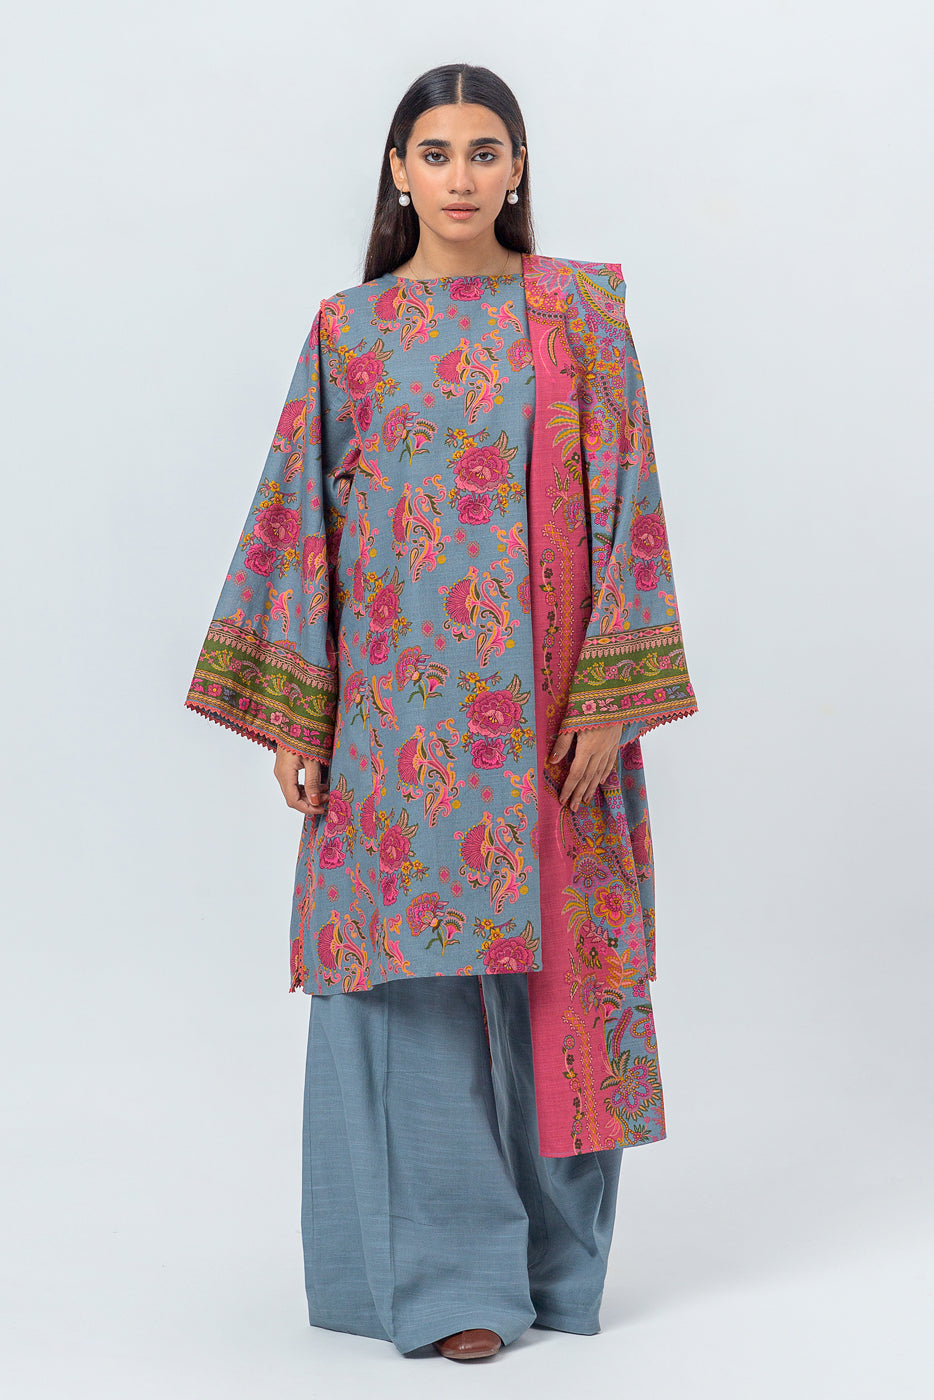 2 PIECE - PRINTED KHADDAR SUIT - GRAY MIST (UNSTITCHED) - BEECHTREE